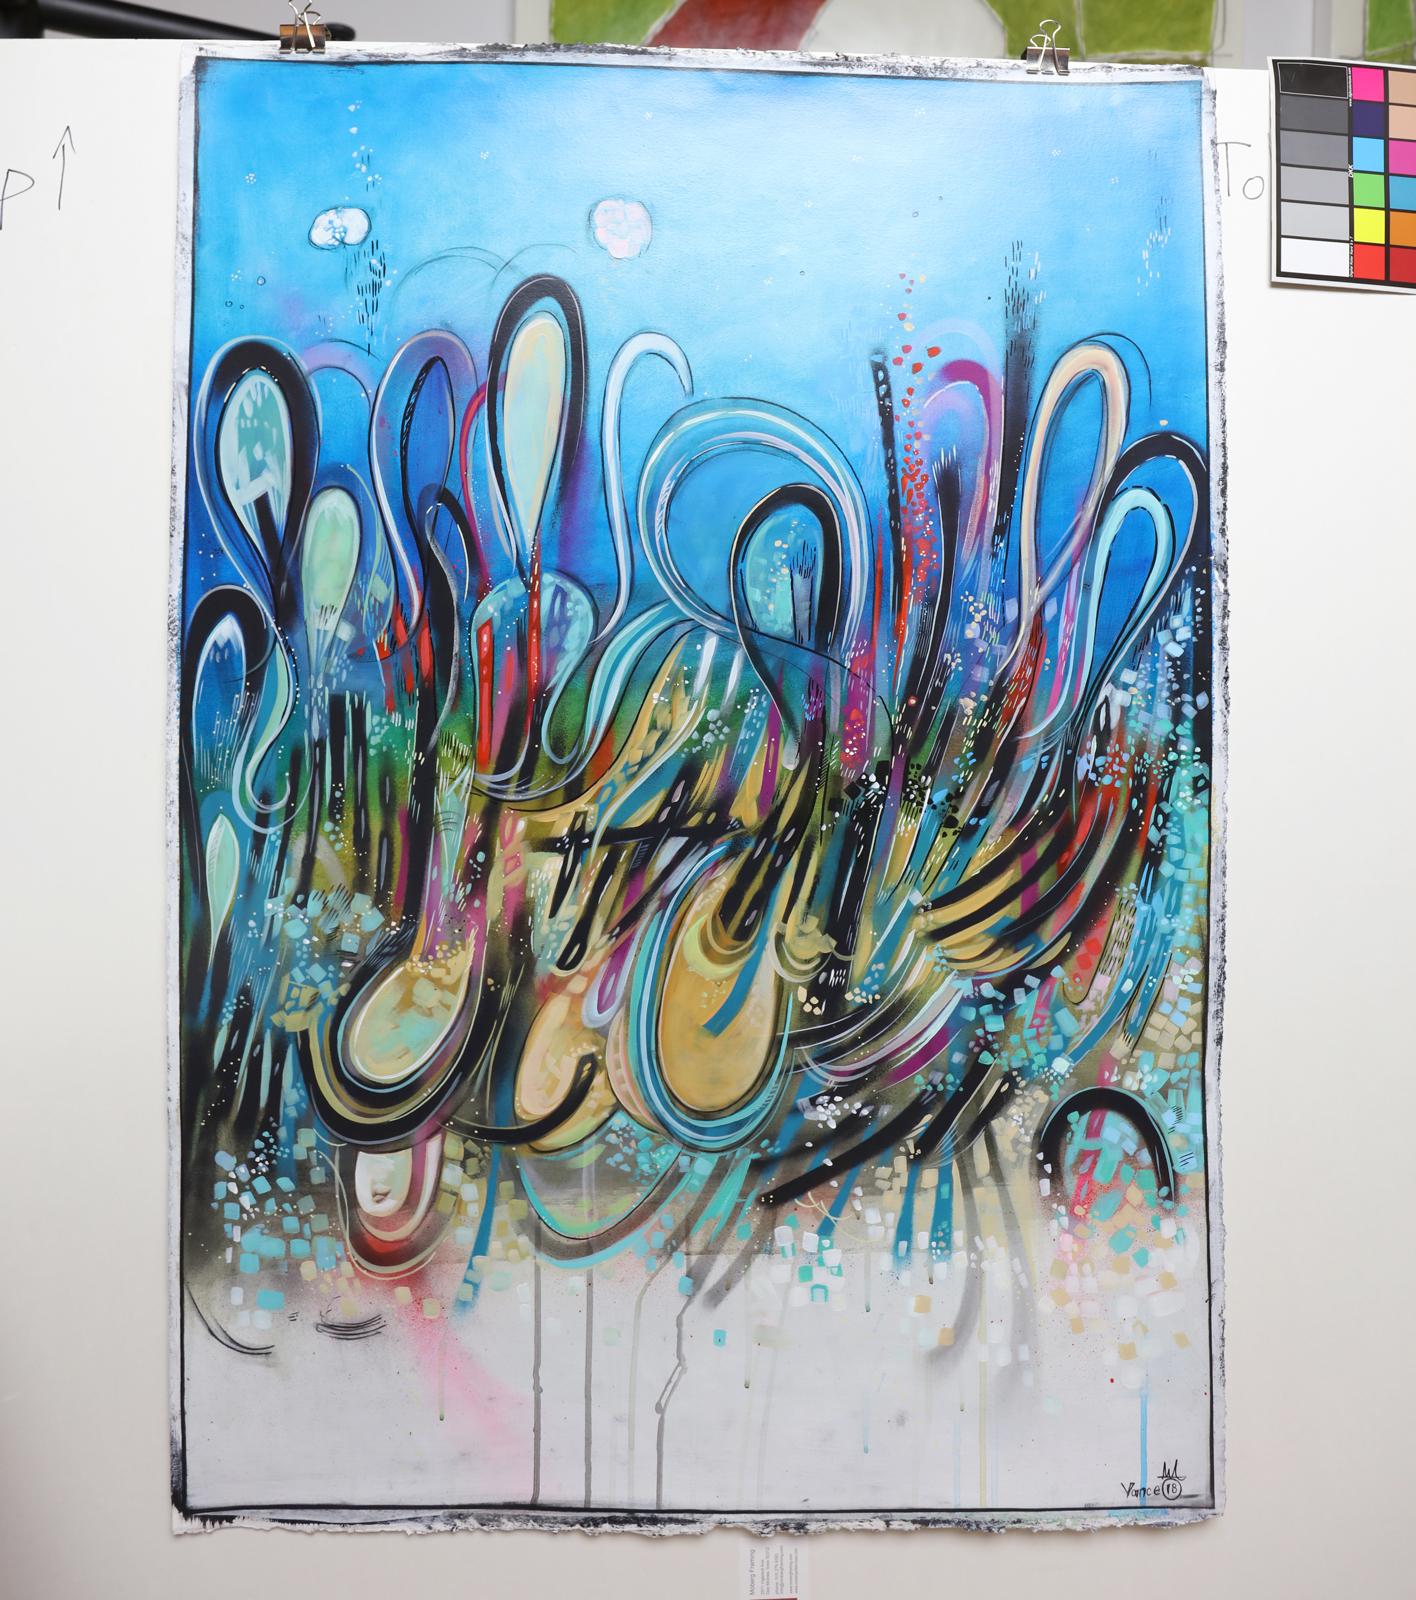 Blue Haze (Abstract painting on paper with bright colored graffiti shapes) - Painting by Chris Vance 